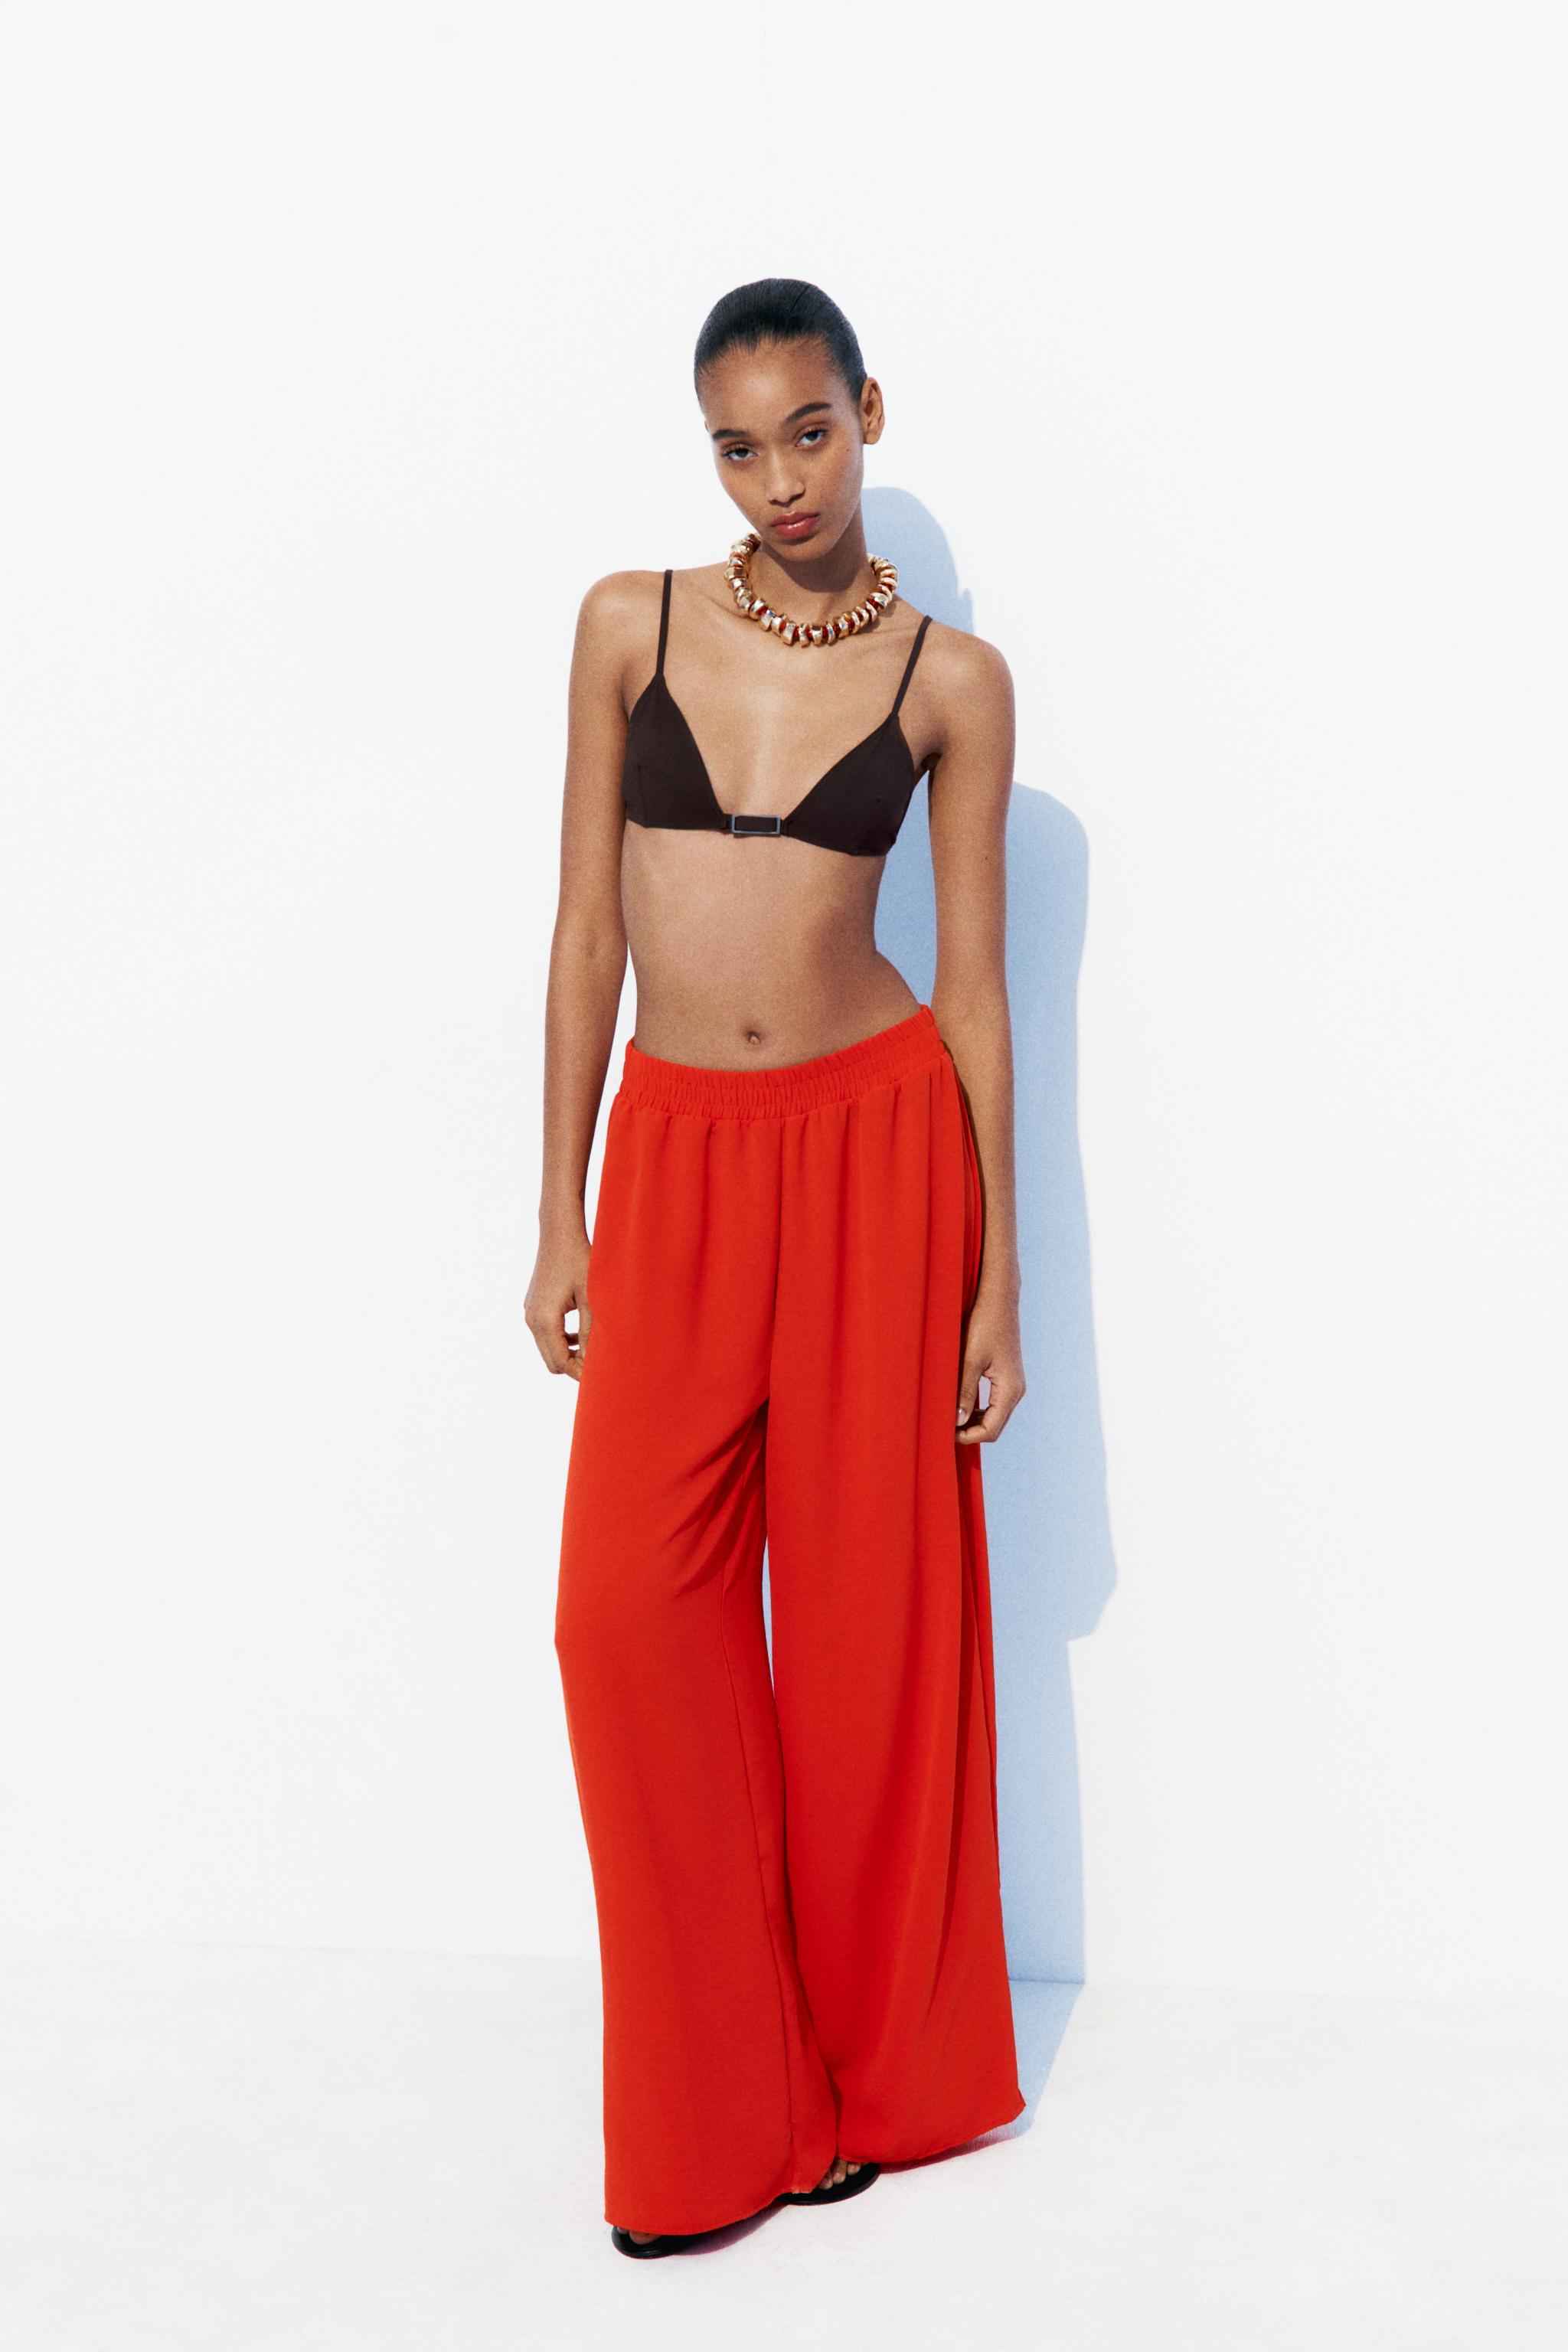 High-waisted Red Pants Elegant Palazzo Pants. Wide Leg Pants, Pants Skirt,  Elegant Trousers, Trousers With Pockets, Evening Pants 